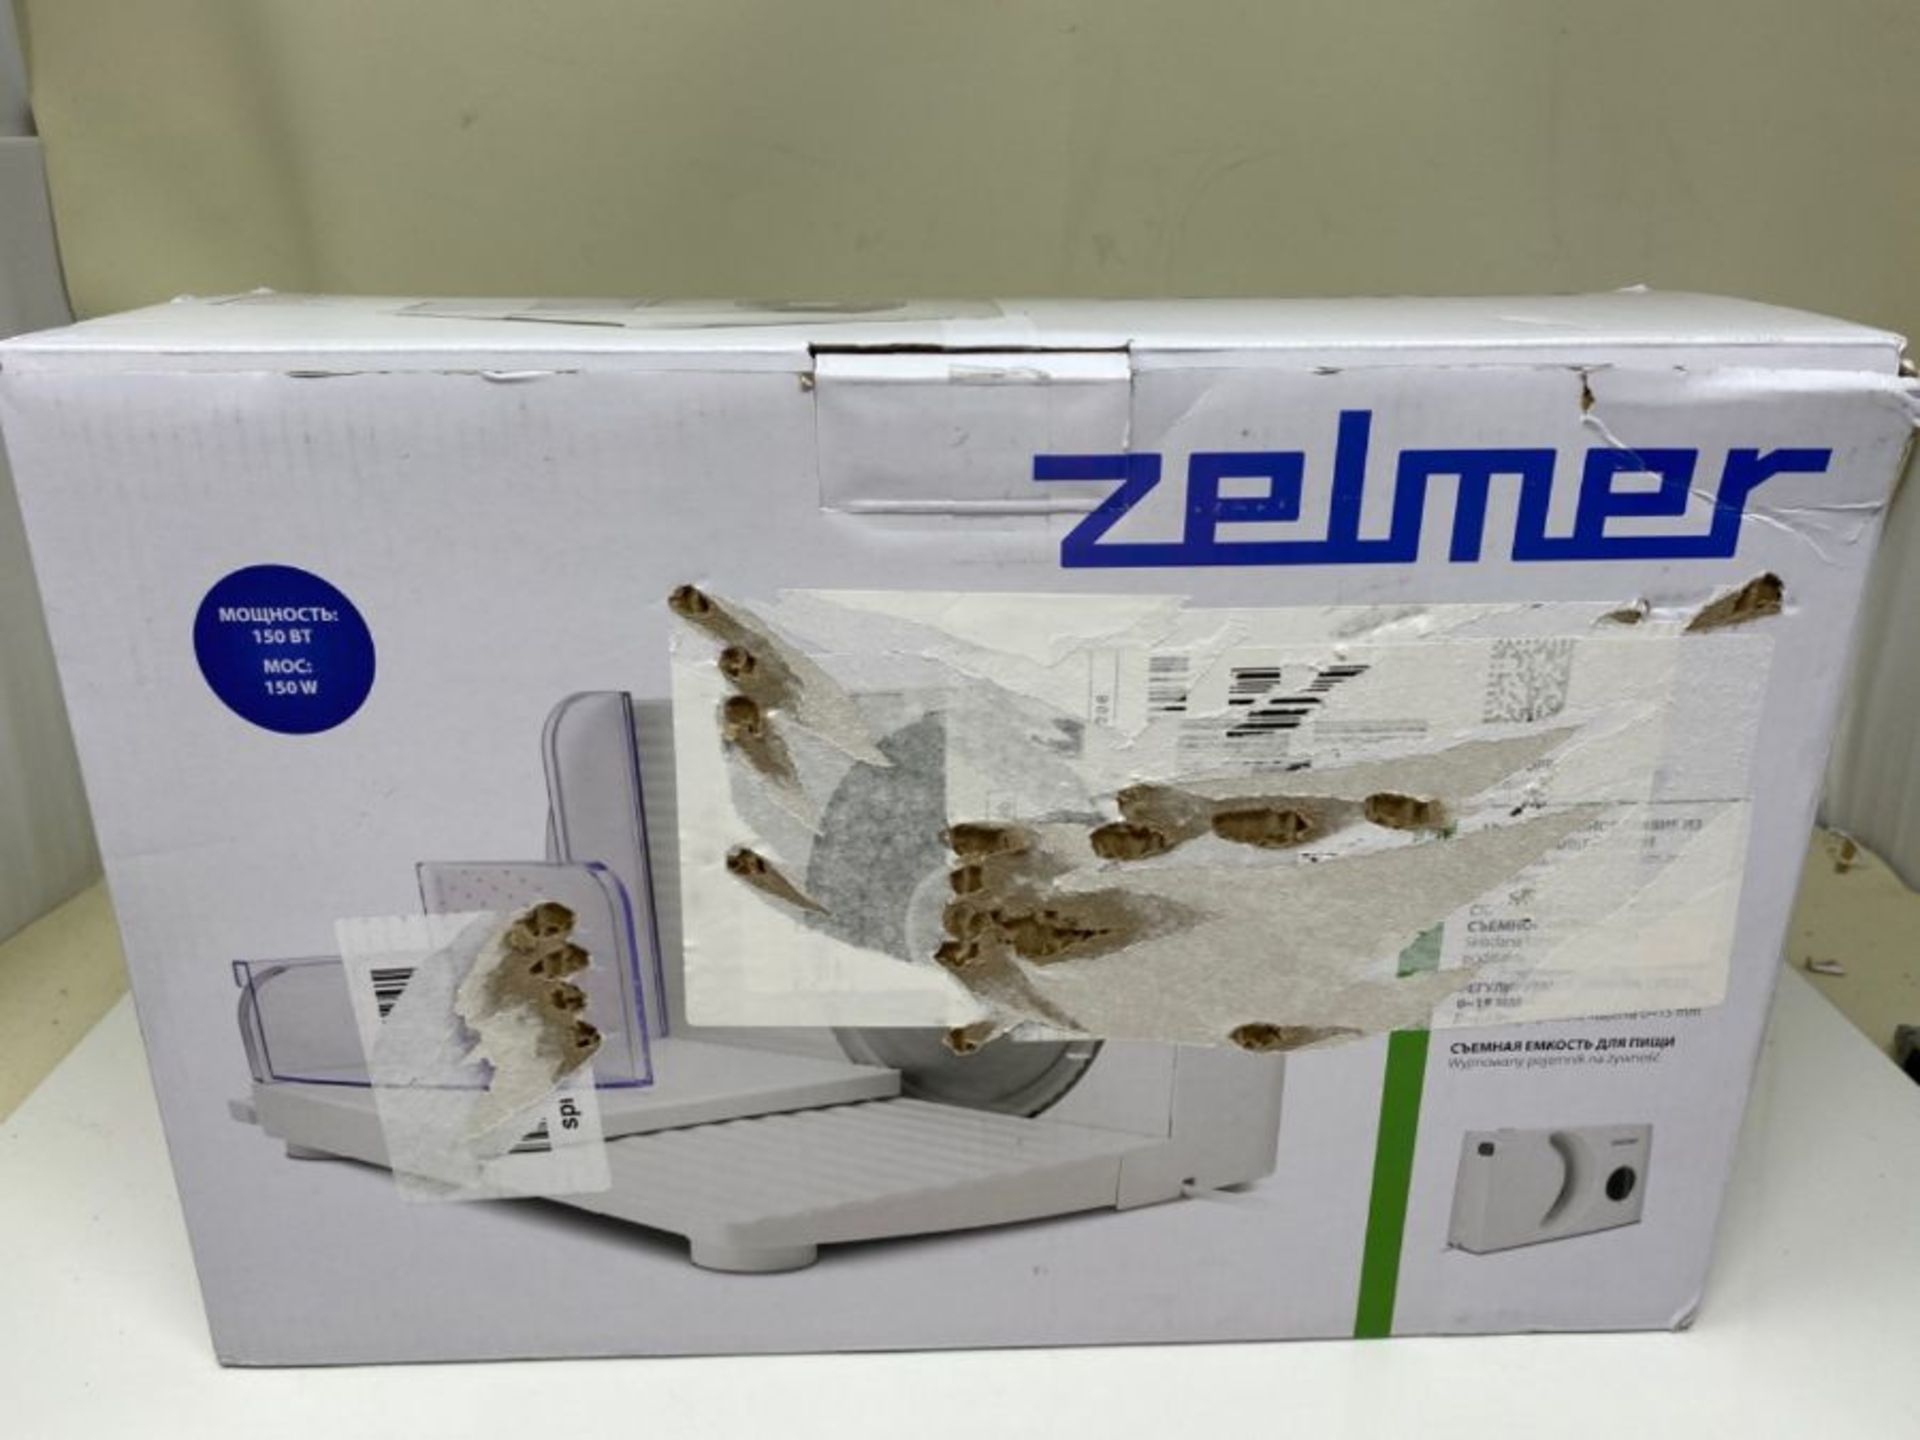 Zelmer ZFS0916 All-Purpose Slicer, Adjustable Cutting Thickness (0-15 mm), 150 W Power - Image 2 of 3